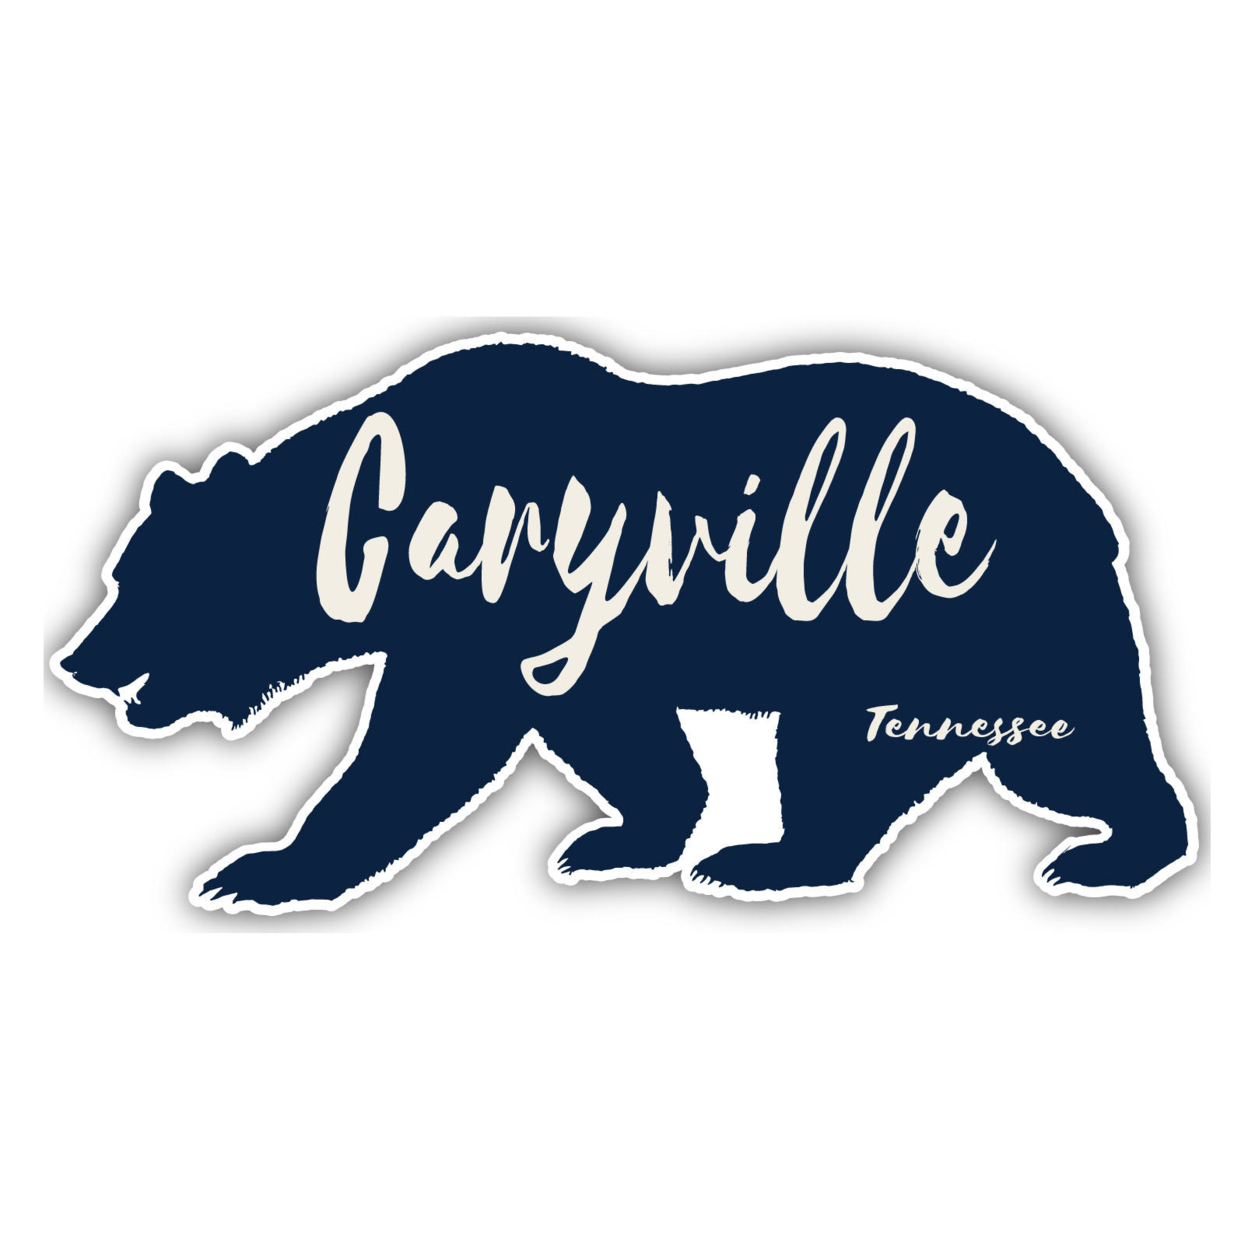 Caryville Tennessee Souvenir Decorative Stickers (Choose Theme And Size) - Single Unit, 6-Inch, Tent